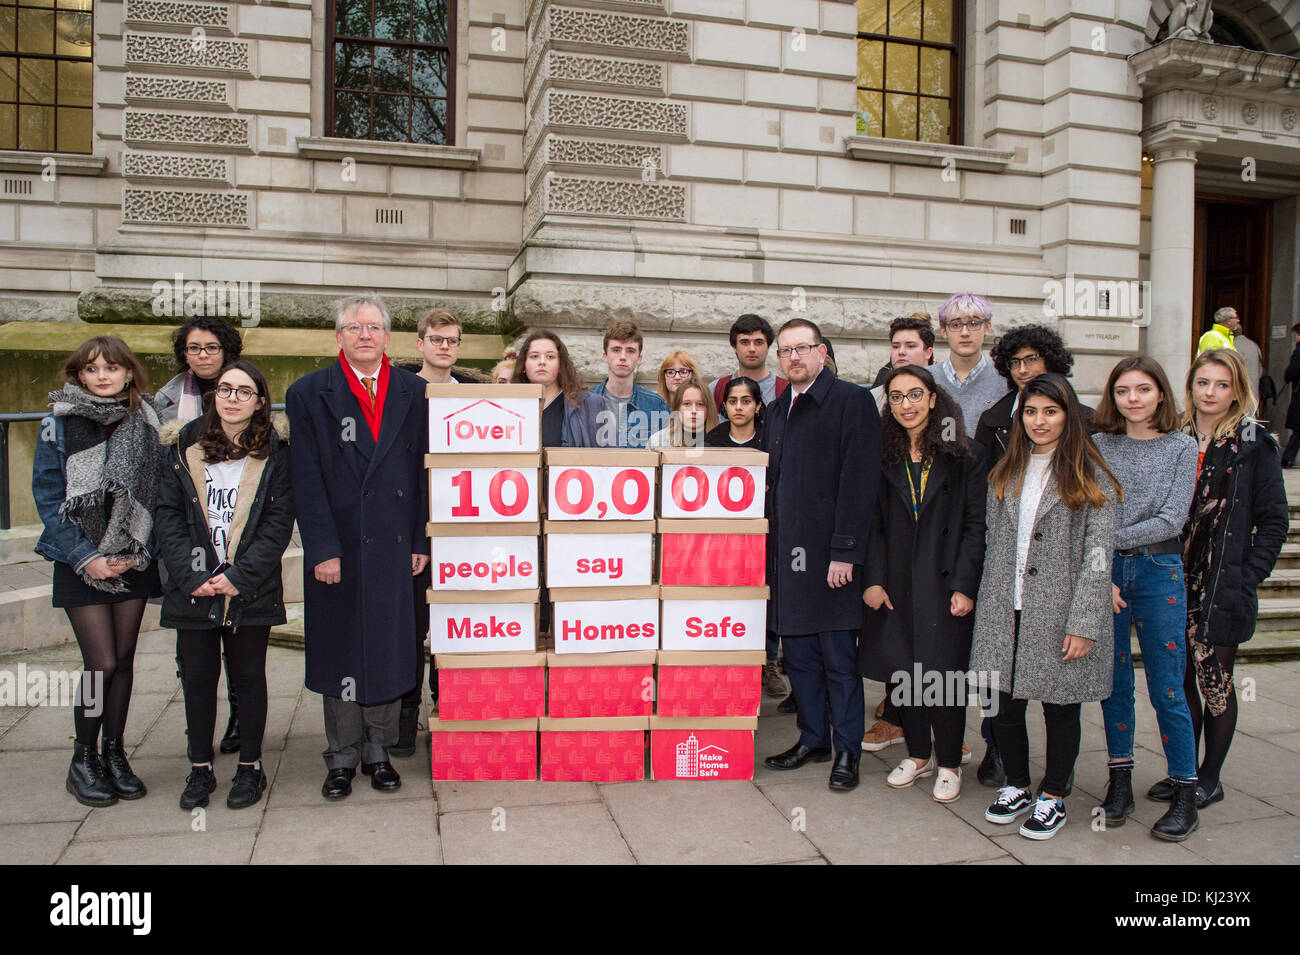 London, United Kingdom. 21st November 2017.Peter Dowd MP, Labour's Shadow Chief Secretary to the Treasury and Andrew Gwynne MP, Labour’s Shadow Secretary of State for Communities and Local Government deliver Labour’s ‘Make Homes Safe’ Petition to the Treasury. Credit: Peter Manning/Alamy Live News Stock Photo